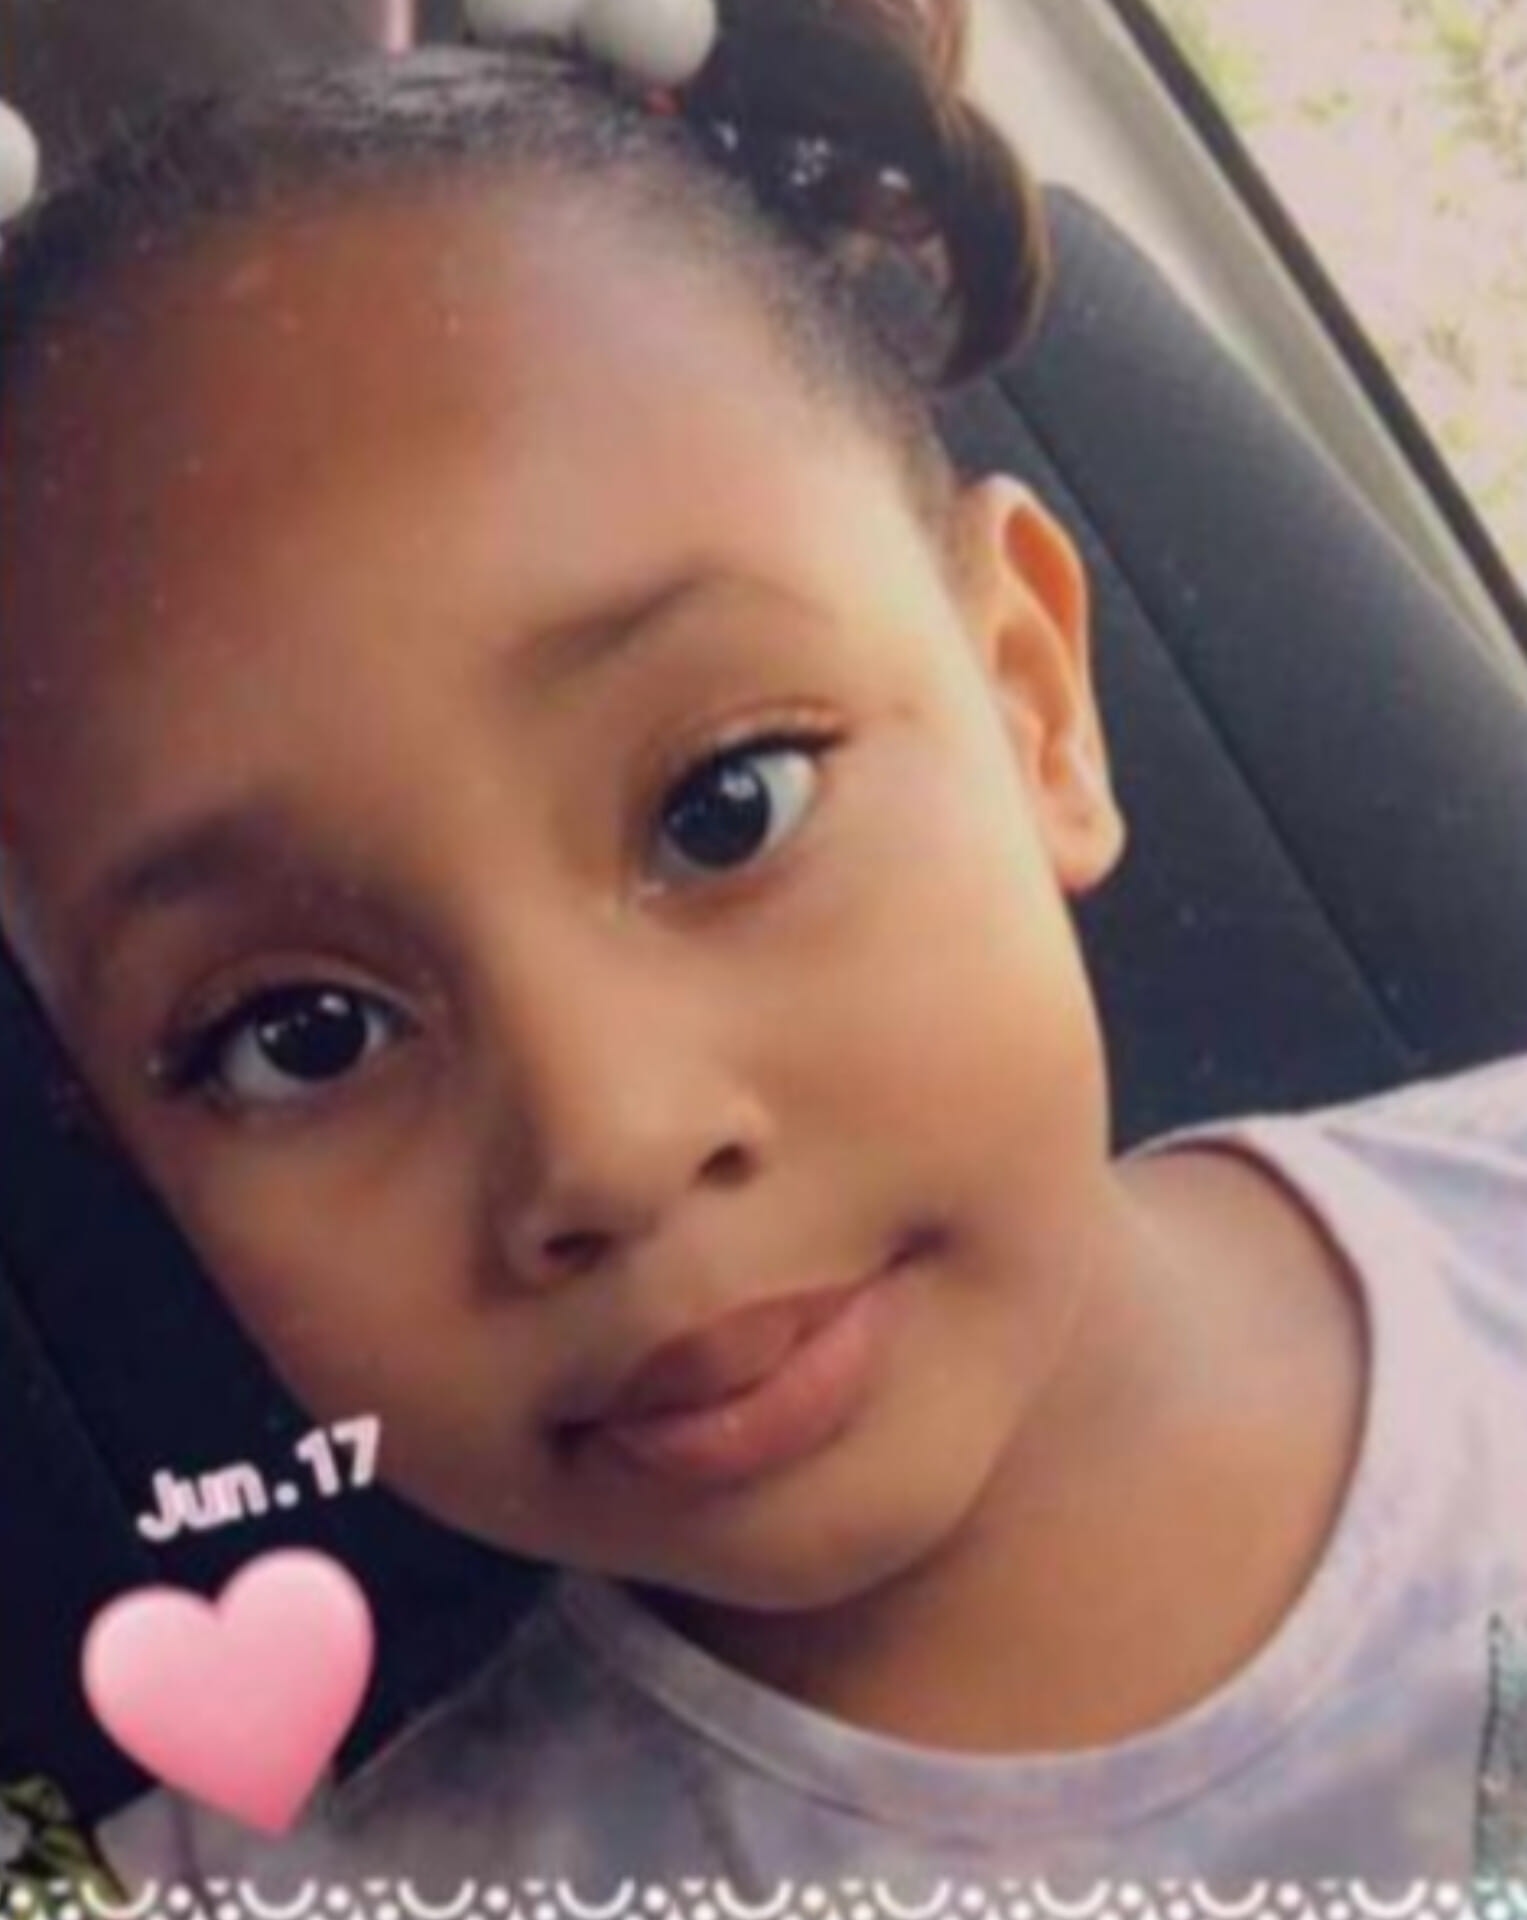 UPDATE: 5-year-old girl who disappeared in Erin found